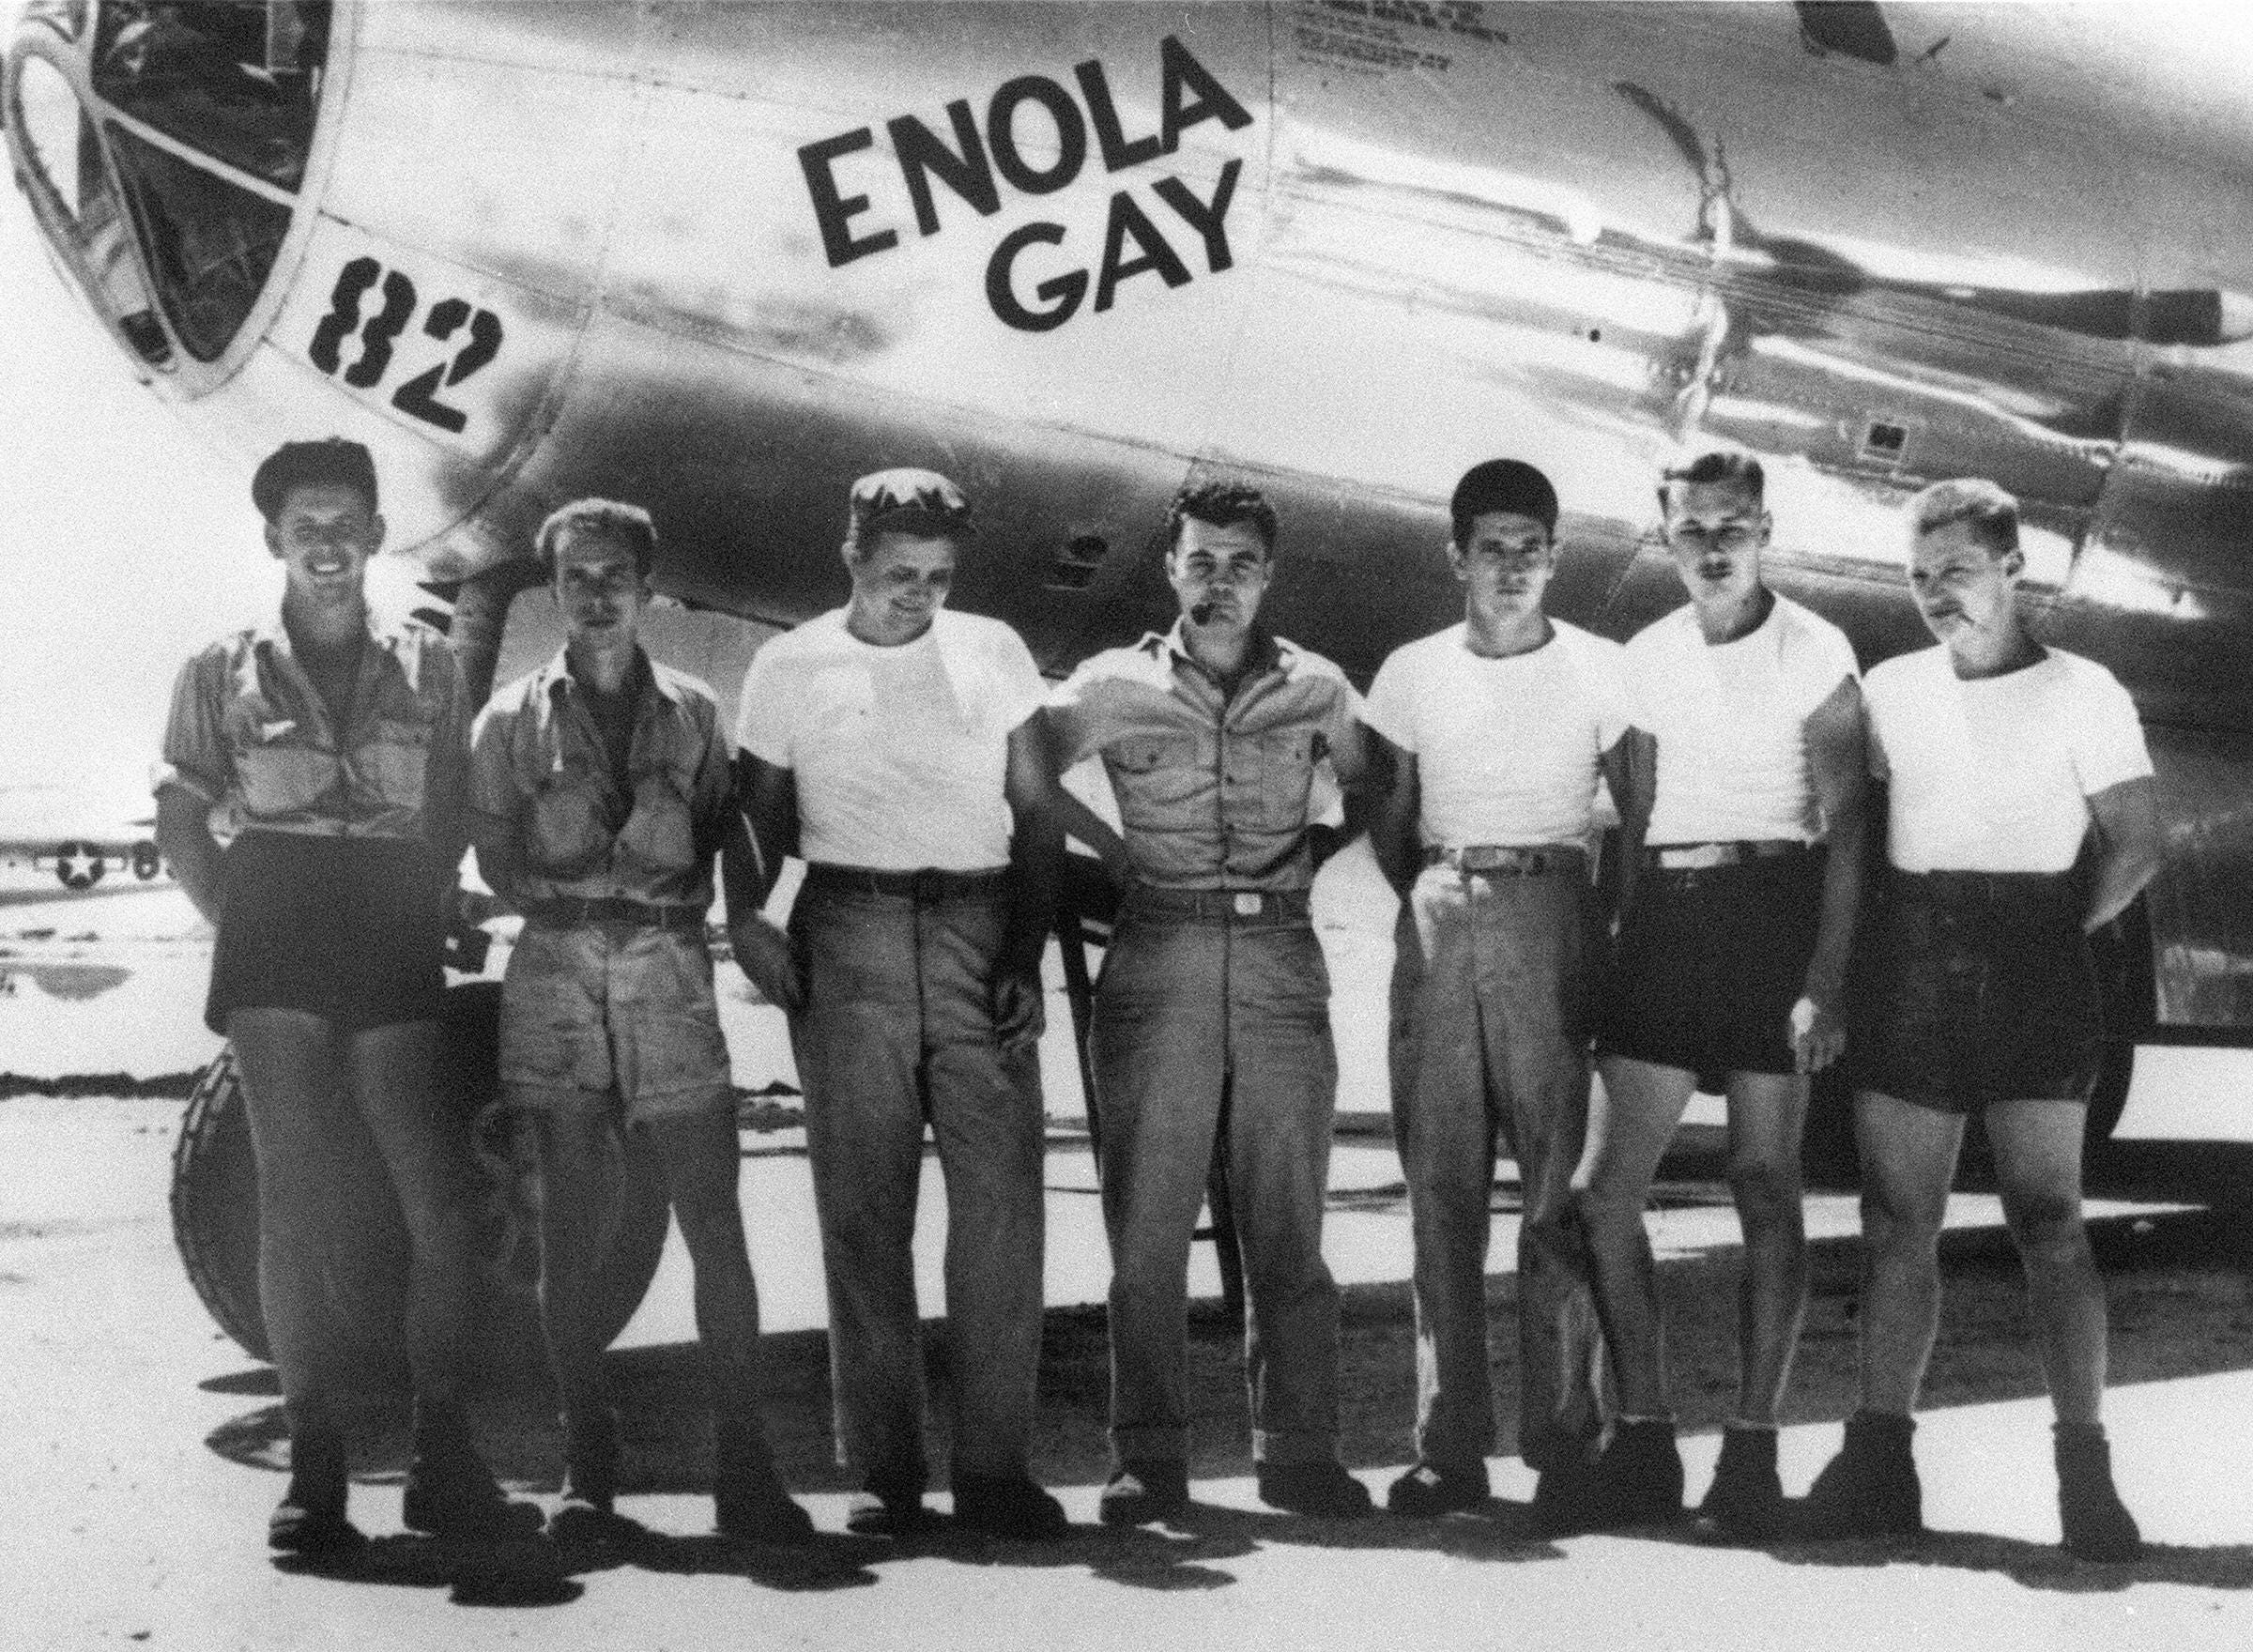 which island did the enola gay take off from